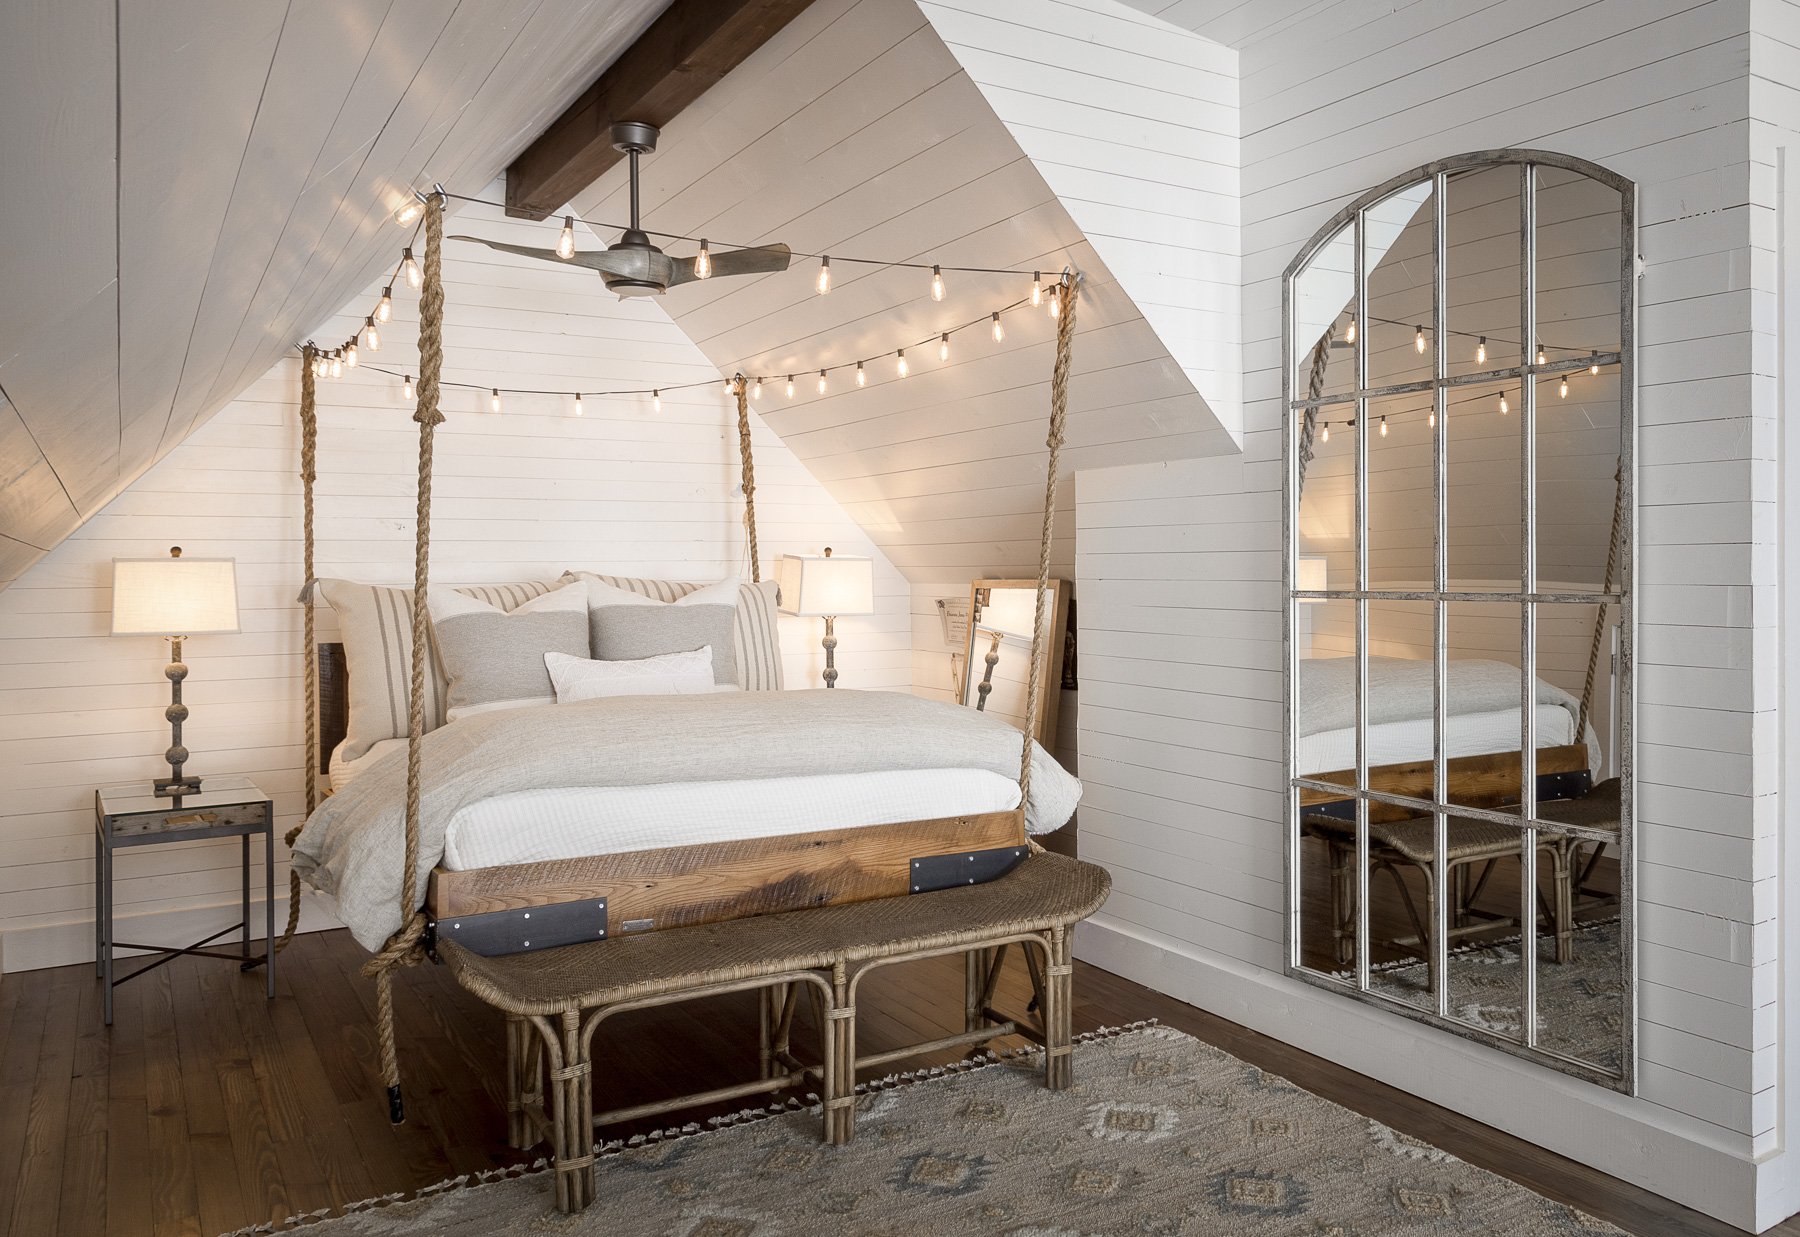 Cozy attic bedroom with rope-hung bed, string lights, and large arched mirror.